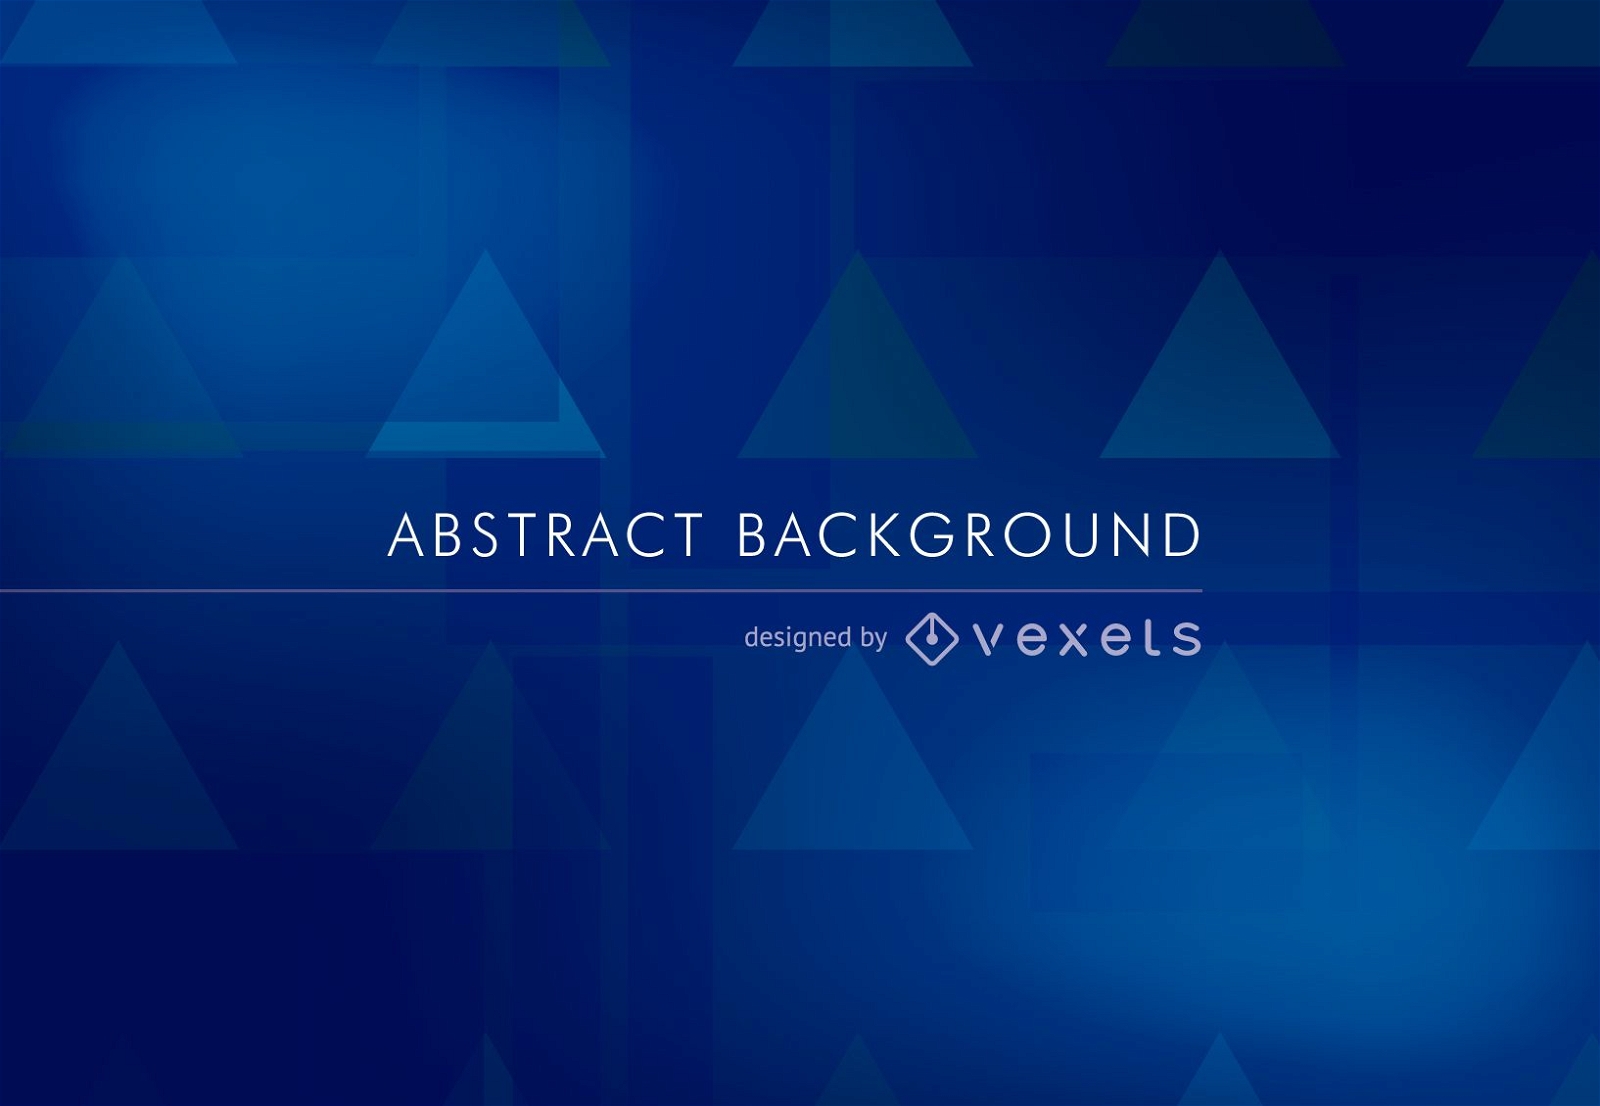 Abstract background in blue with some triangles